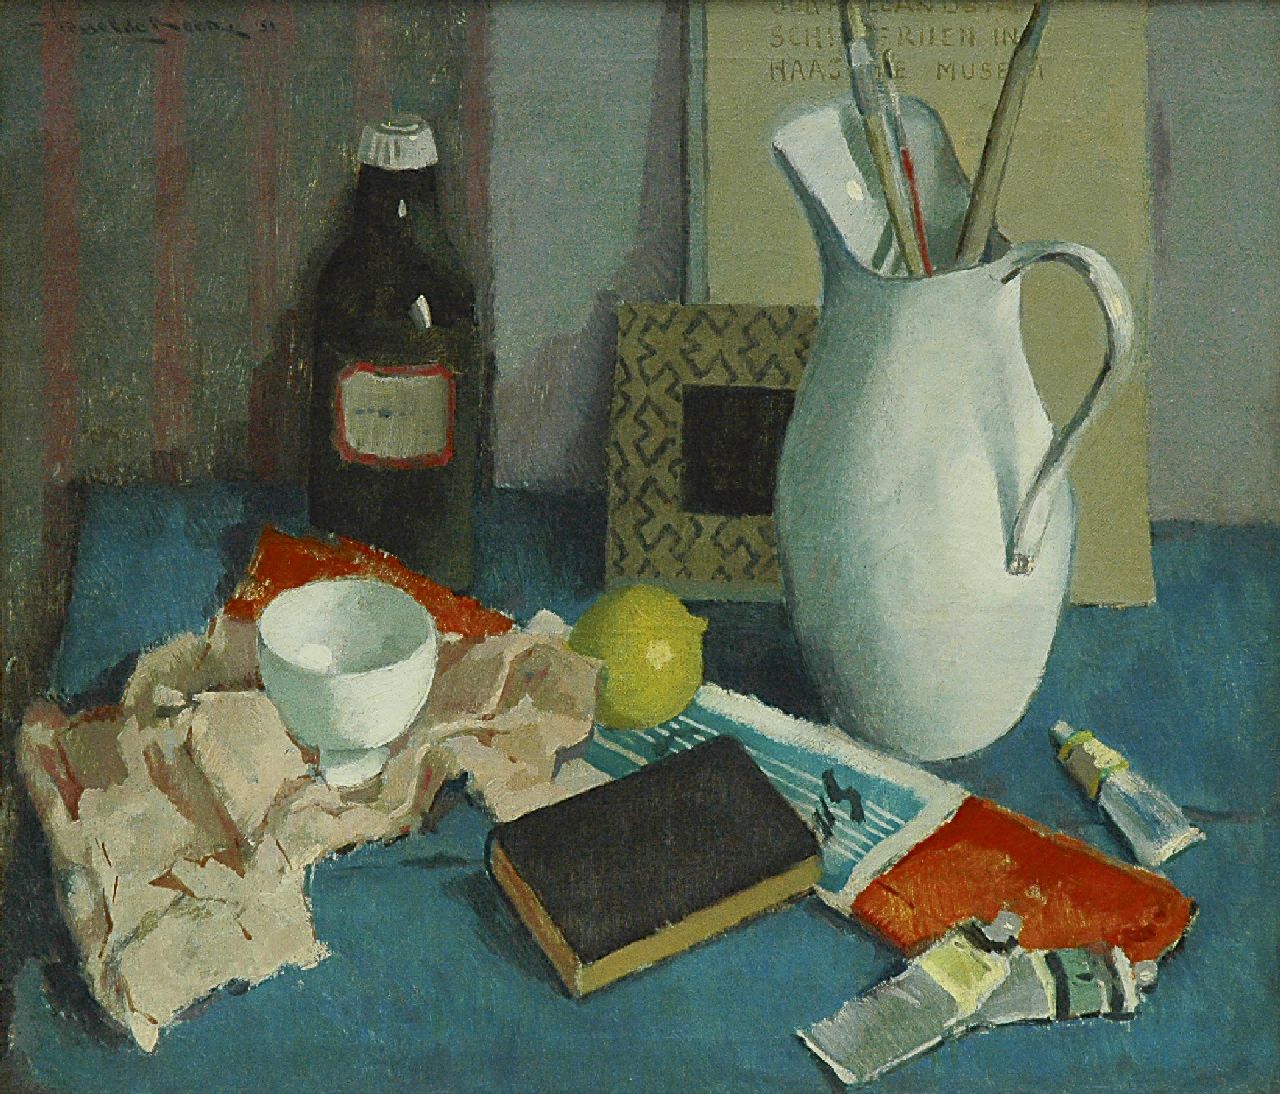 Boer H. de | Hessel de Boer, Still life with a white jug, oil on canvas 60.4 x 70.3 cm, signed u.l. and dated '51